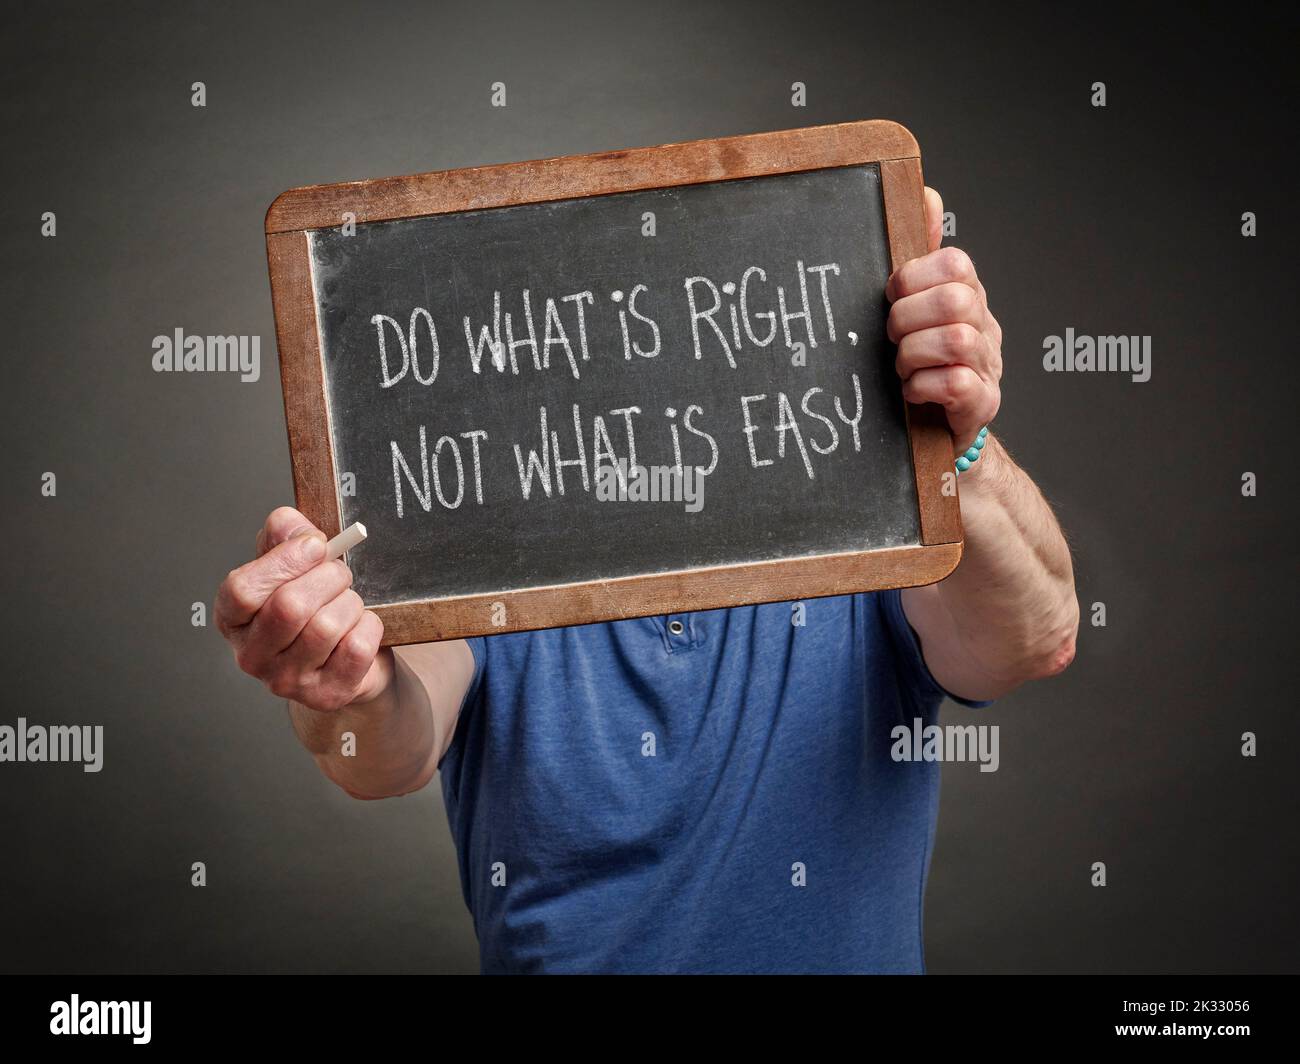 Do what is right, not what is easy - white chalk text on a slate blackboard held by male teacher, presenter or mentor, ethics concept Stock Photo